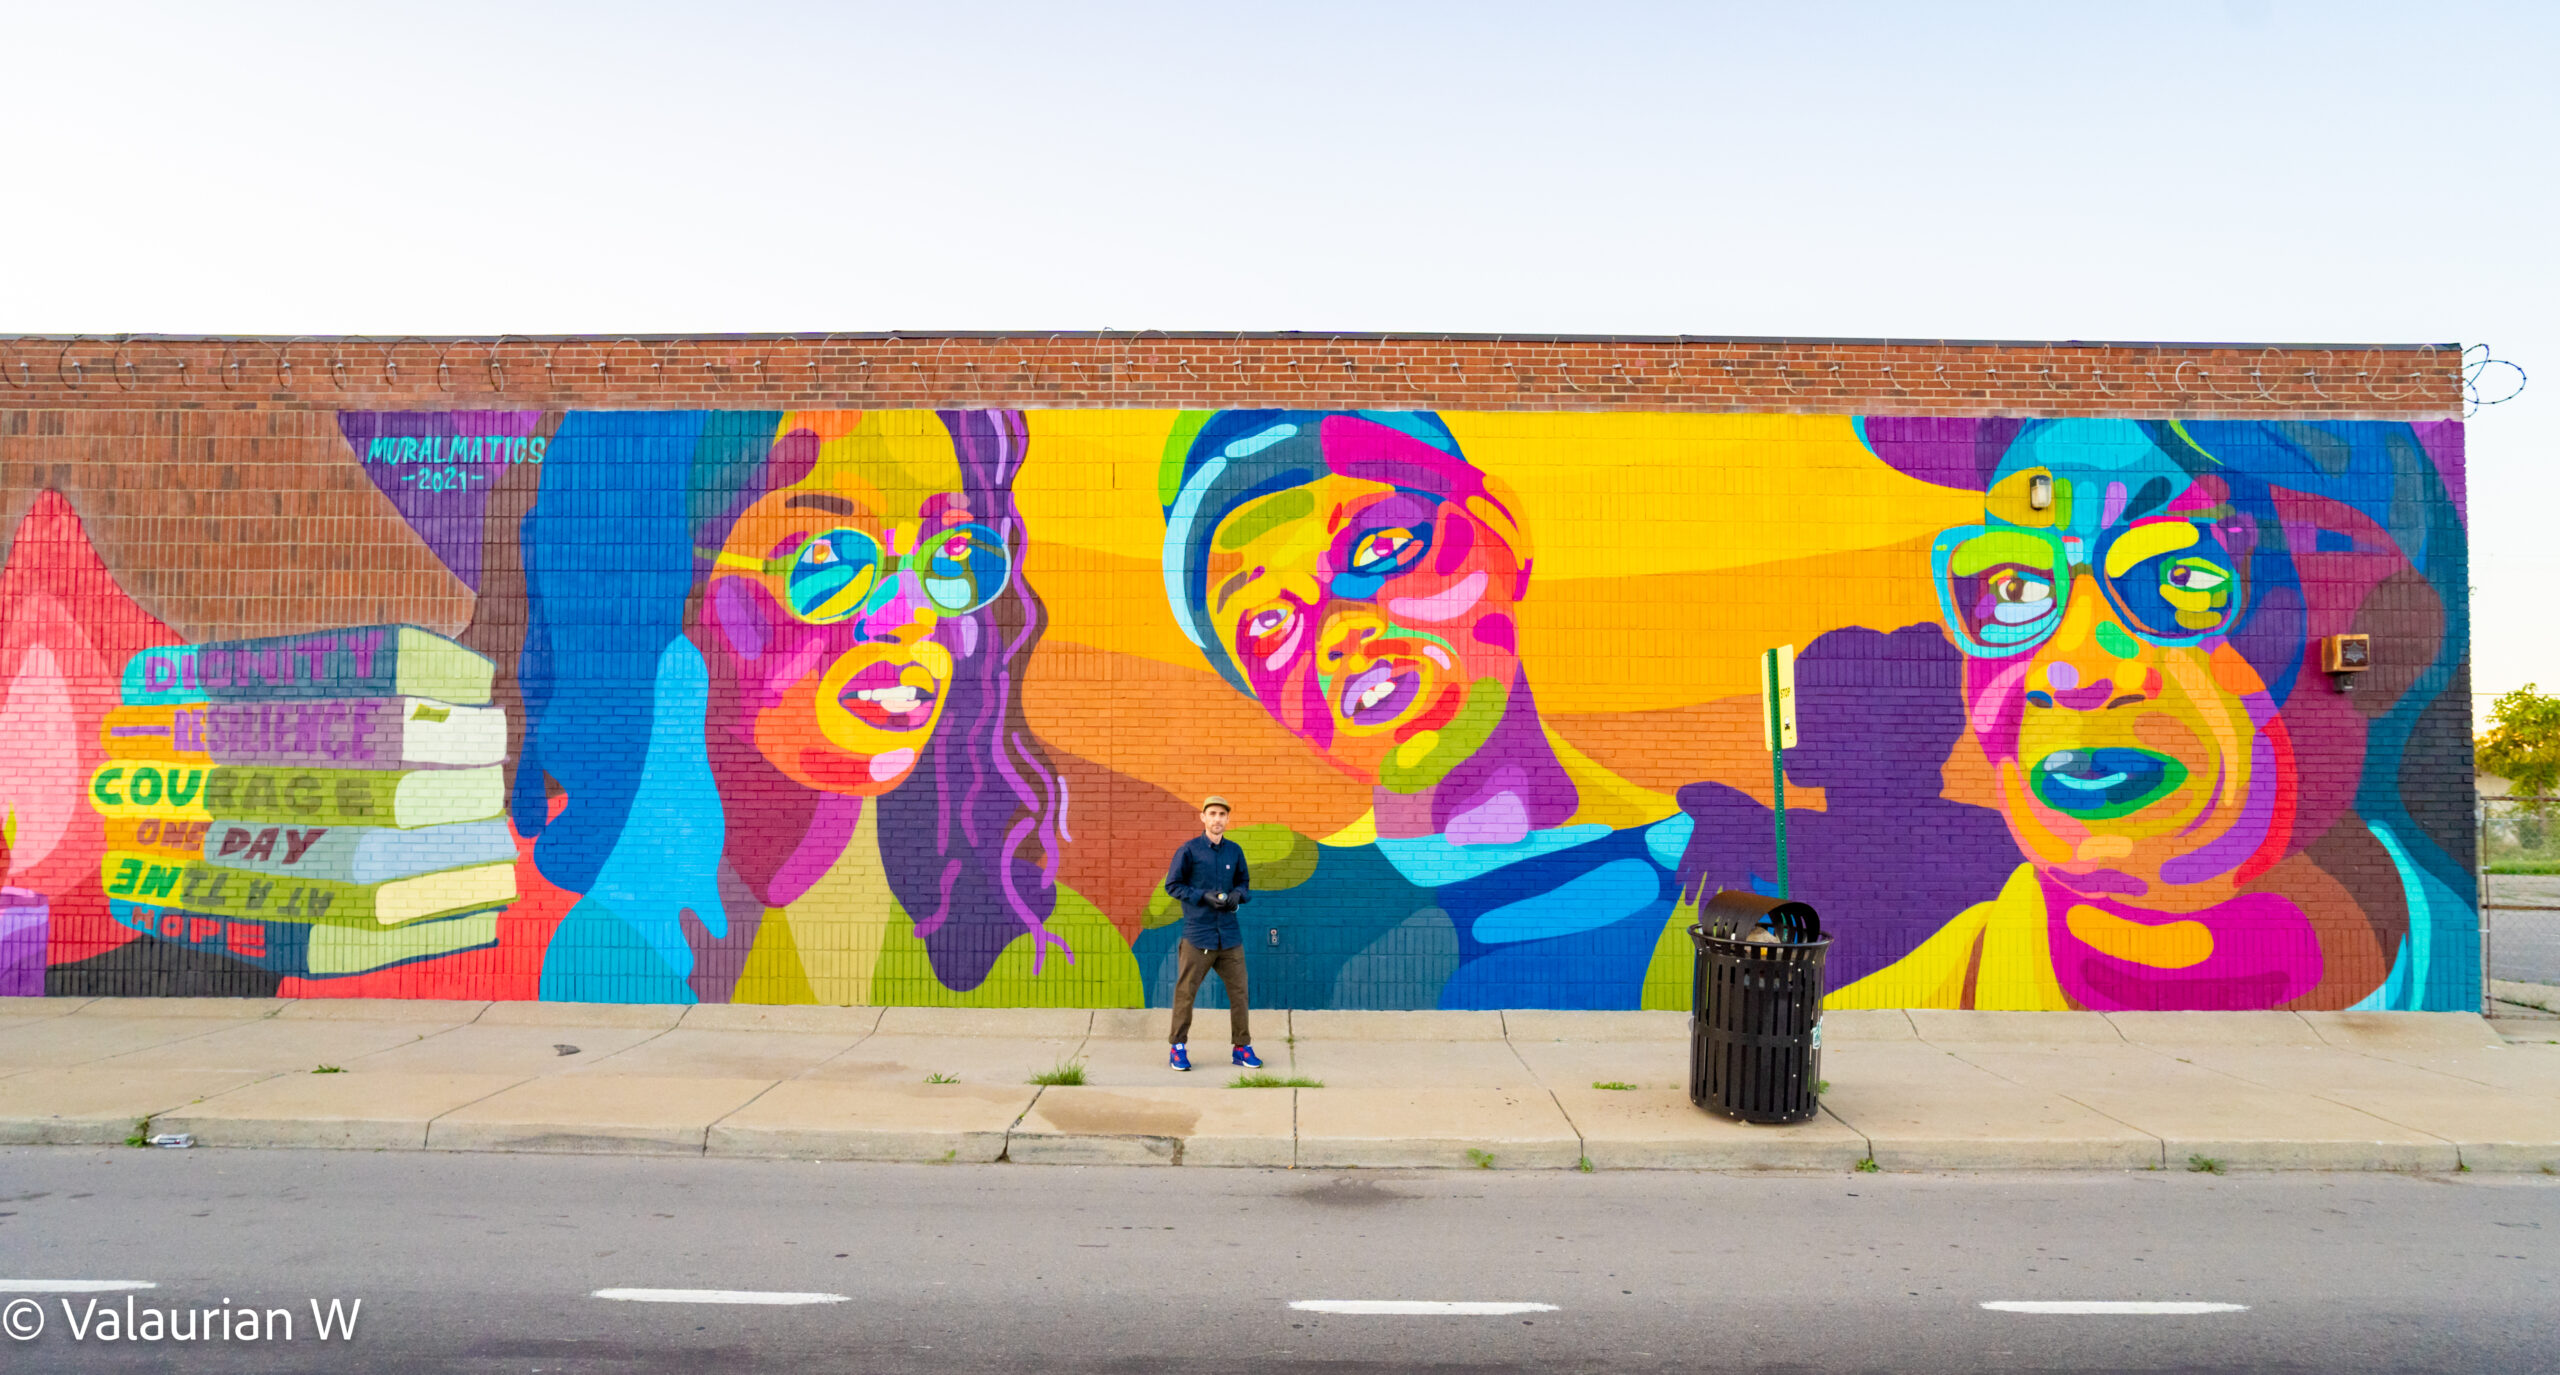 Overdose-Prevention-Awareness-Mural-in-Detroit-Michigan-_-Val-Waller-scaled